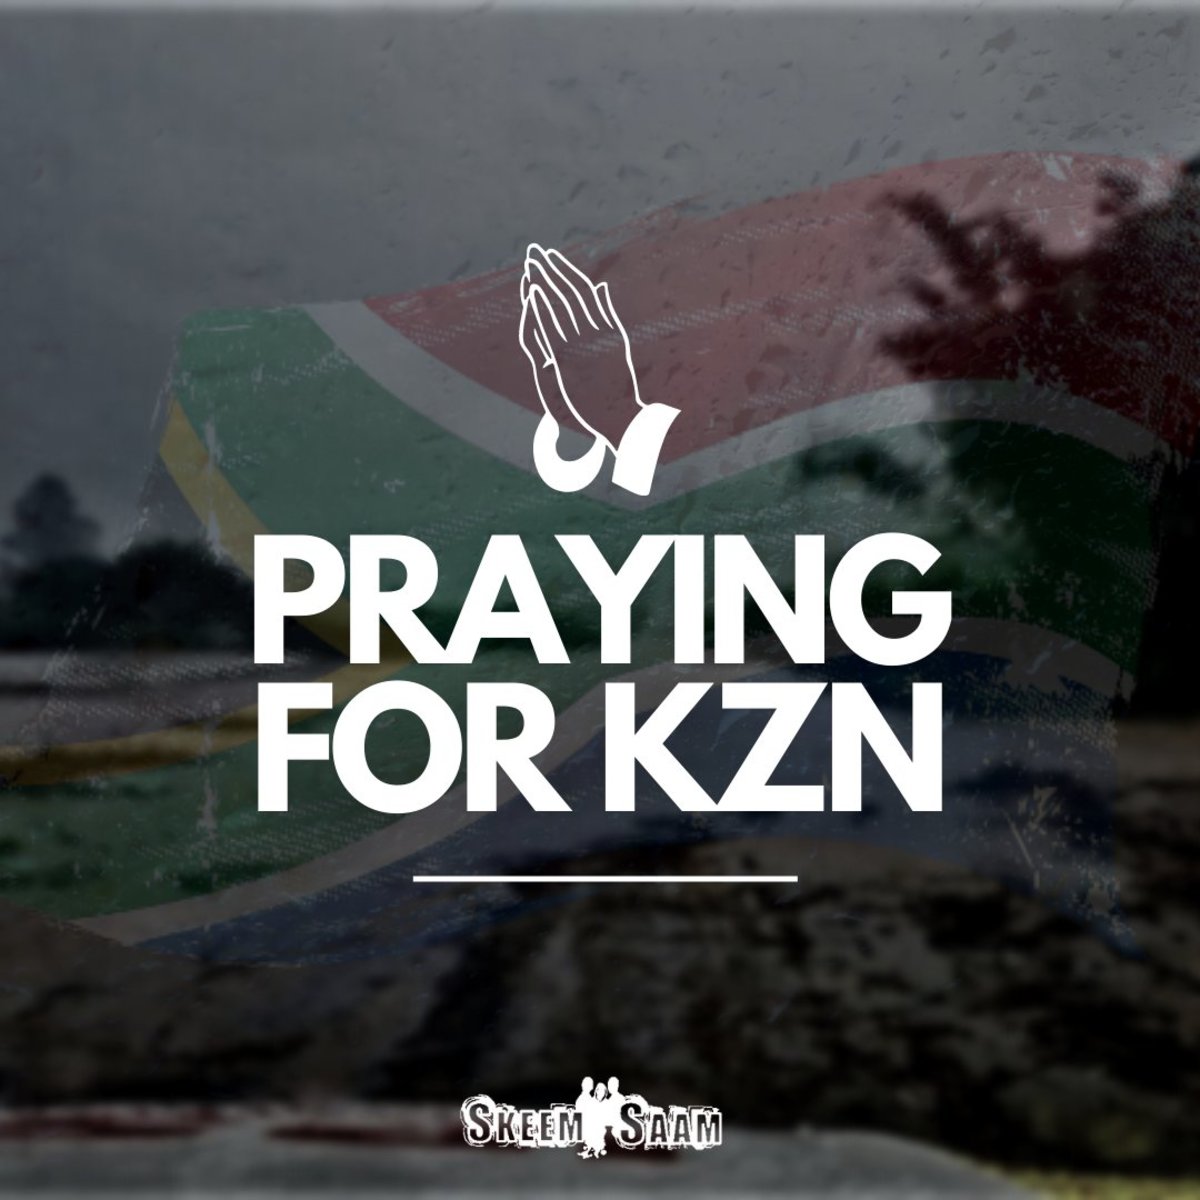 Kzn Floods Recorded as the Most Deadly Weather Conditions in South African's History as the Death Toll Increases to 306.